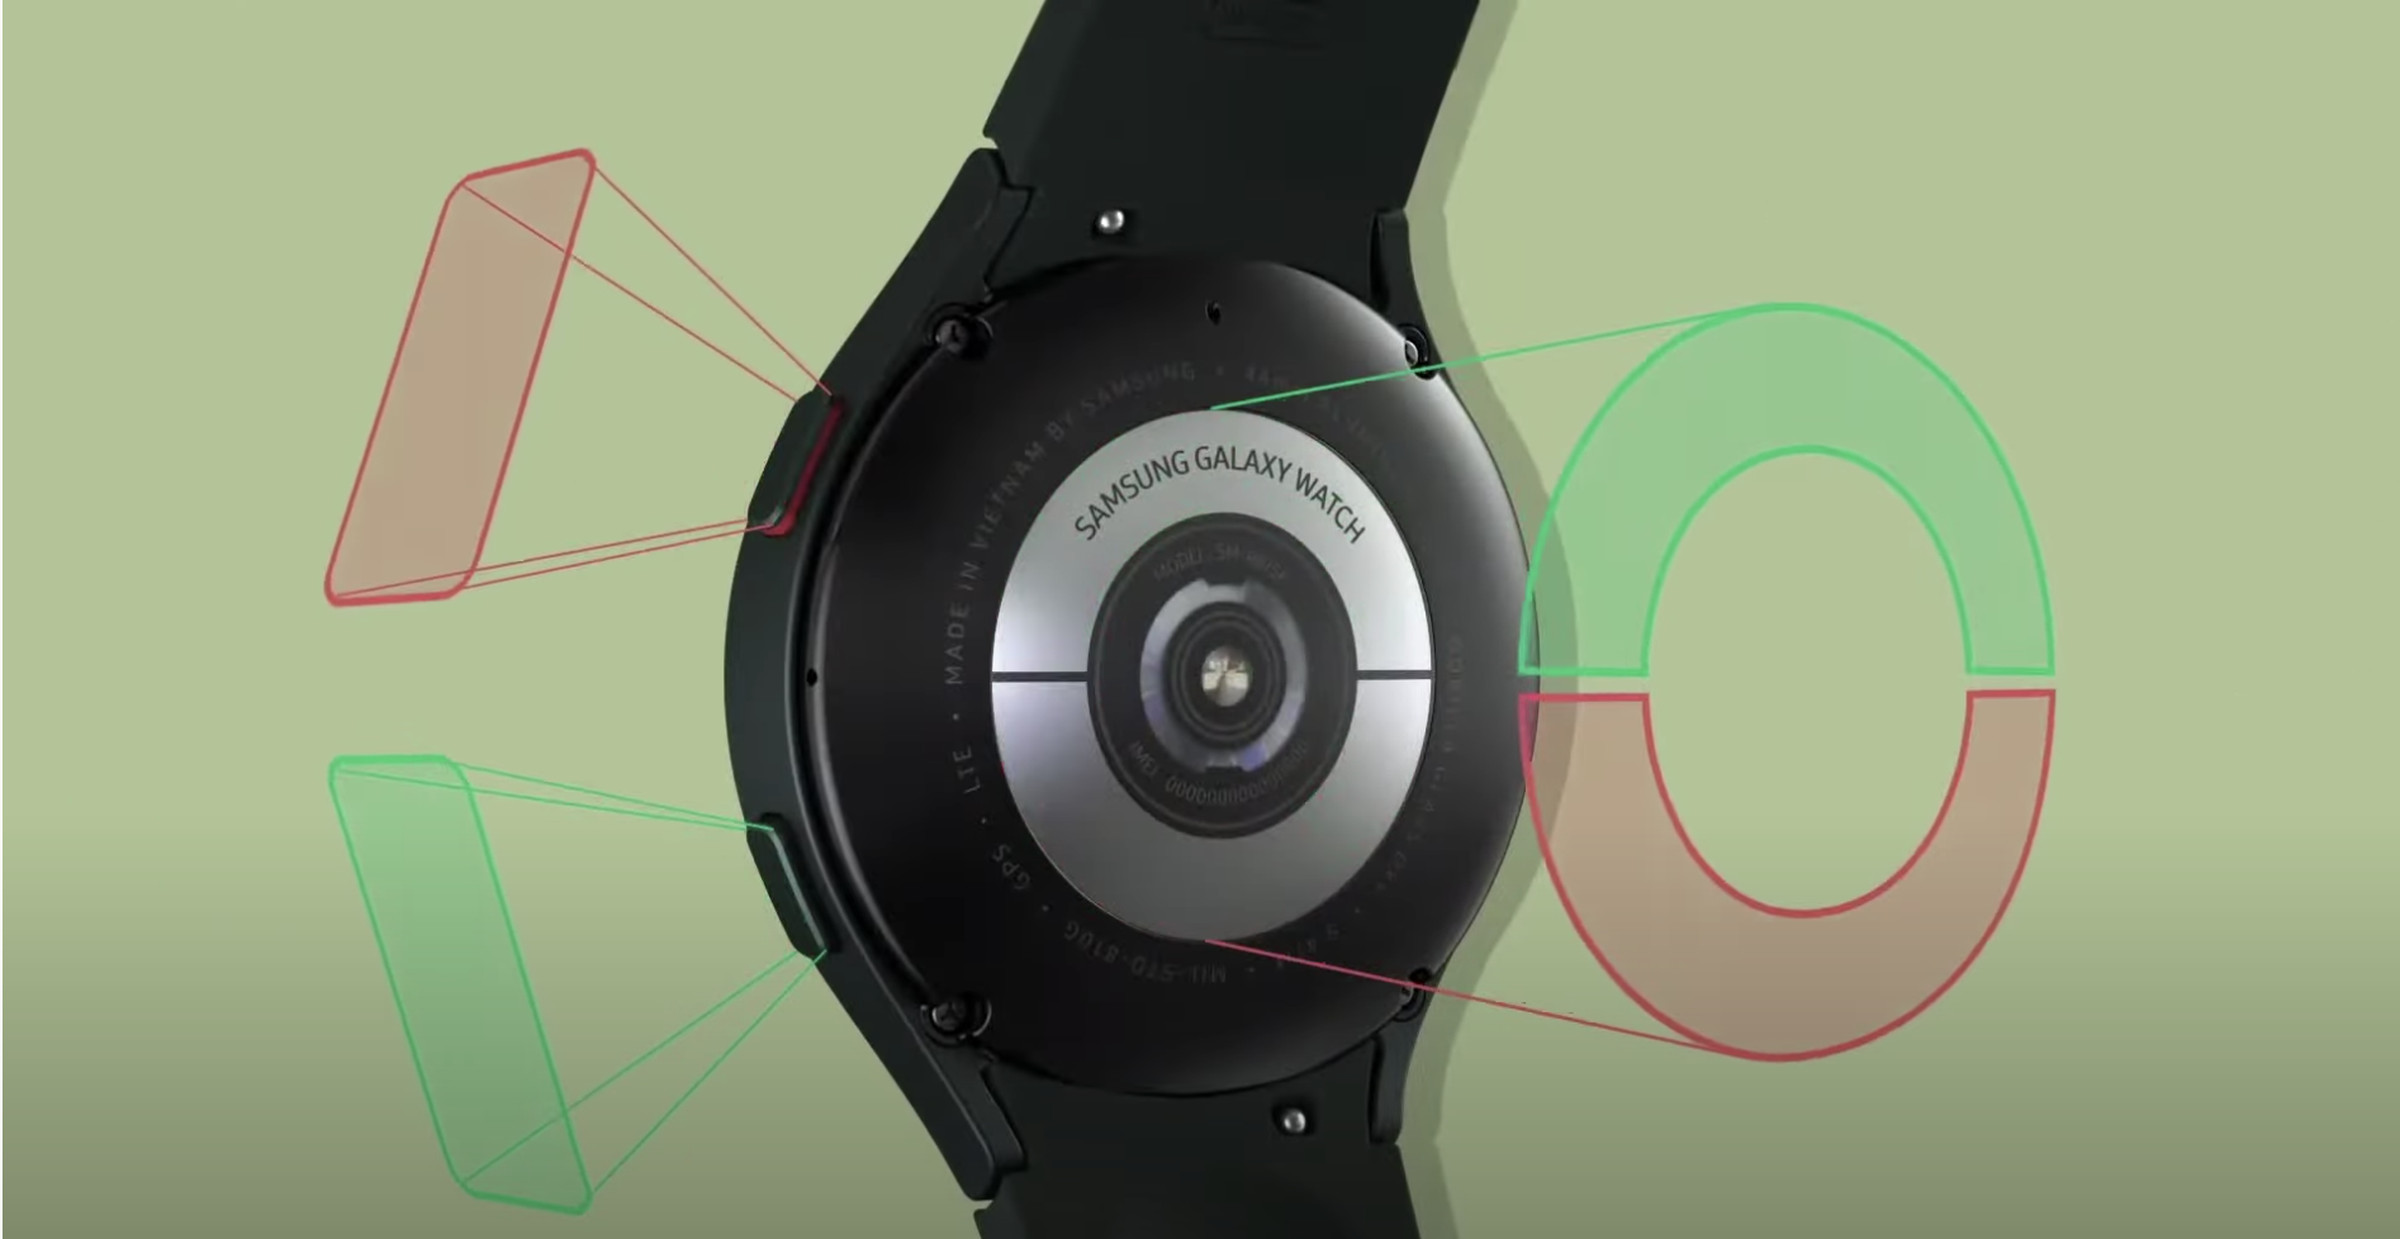 Samsung shrunk down the sensors used for bioelectrical impedance analysis and added them to the watch.